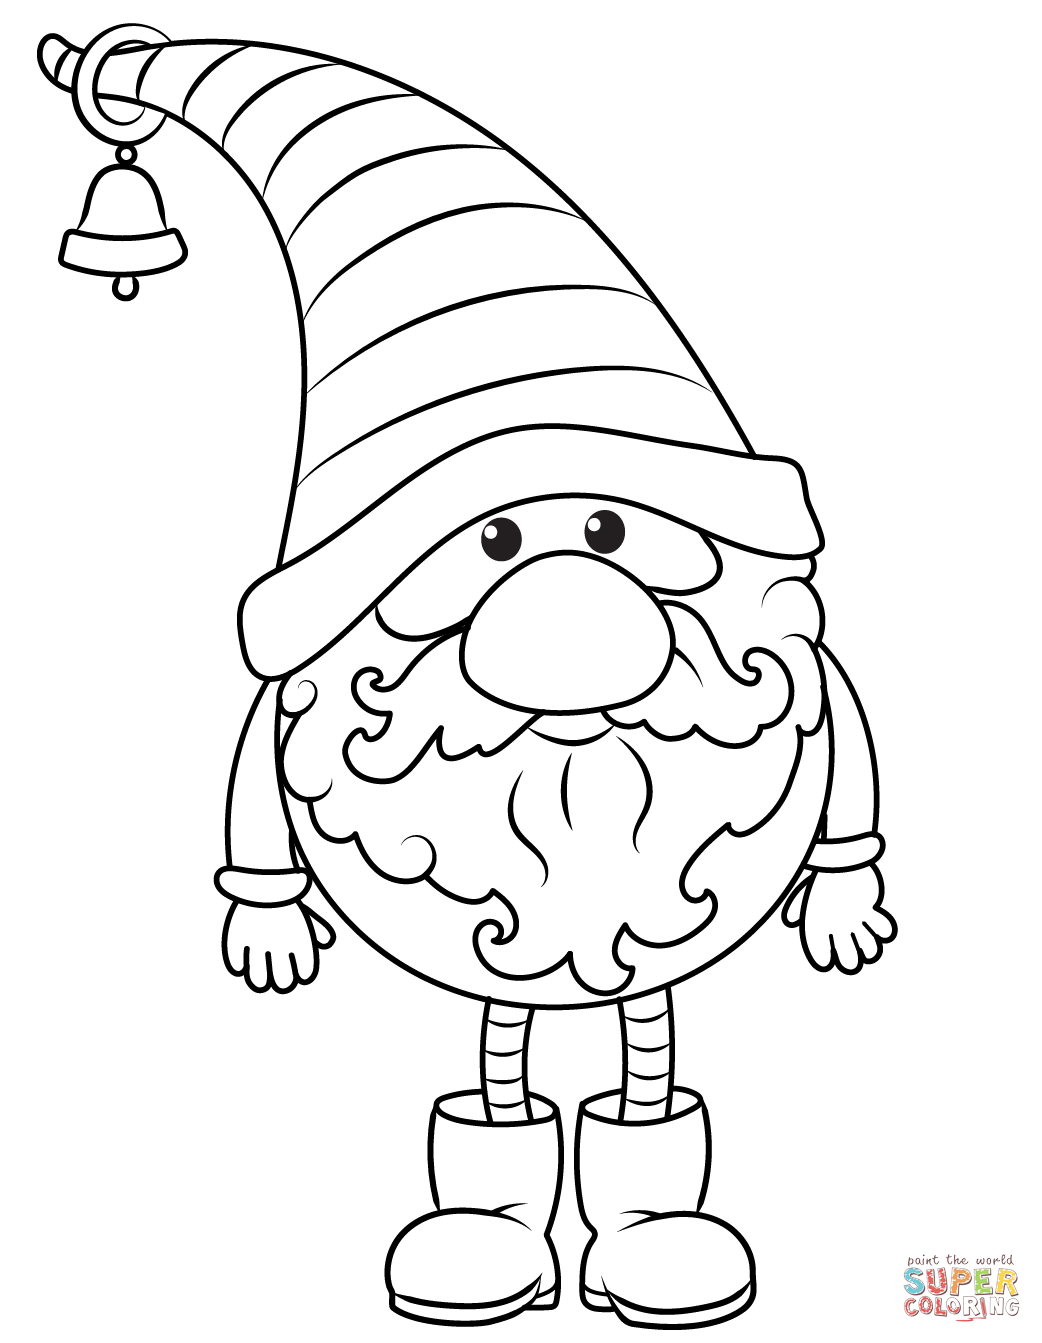 Christmas Gnome coloring page | Free Printable Coloring Pages